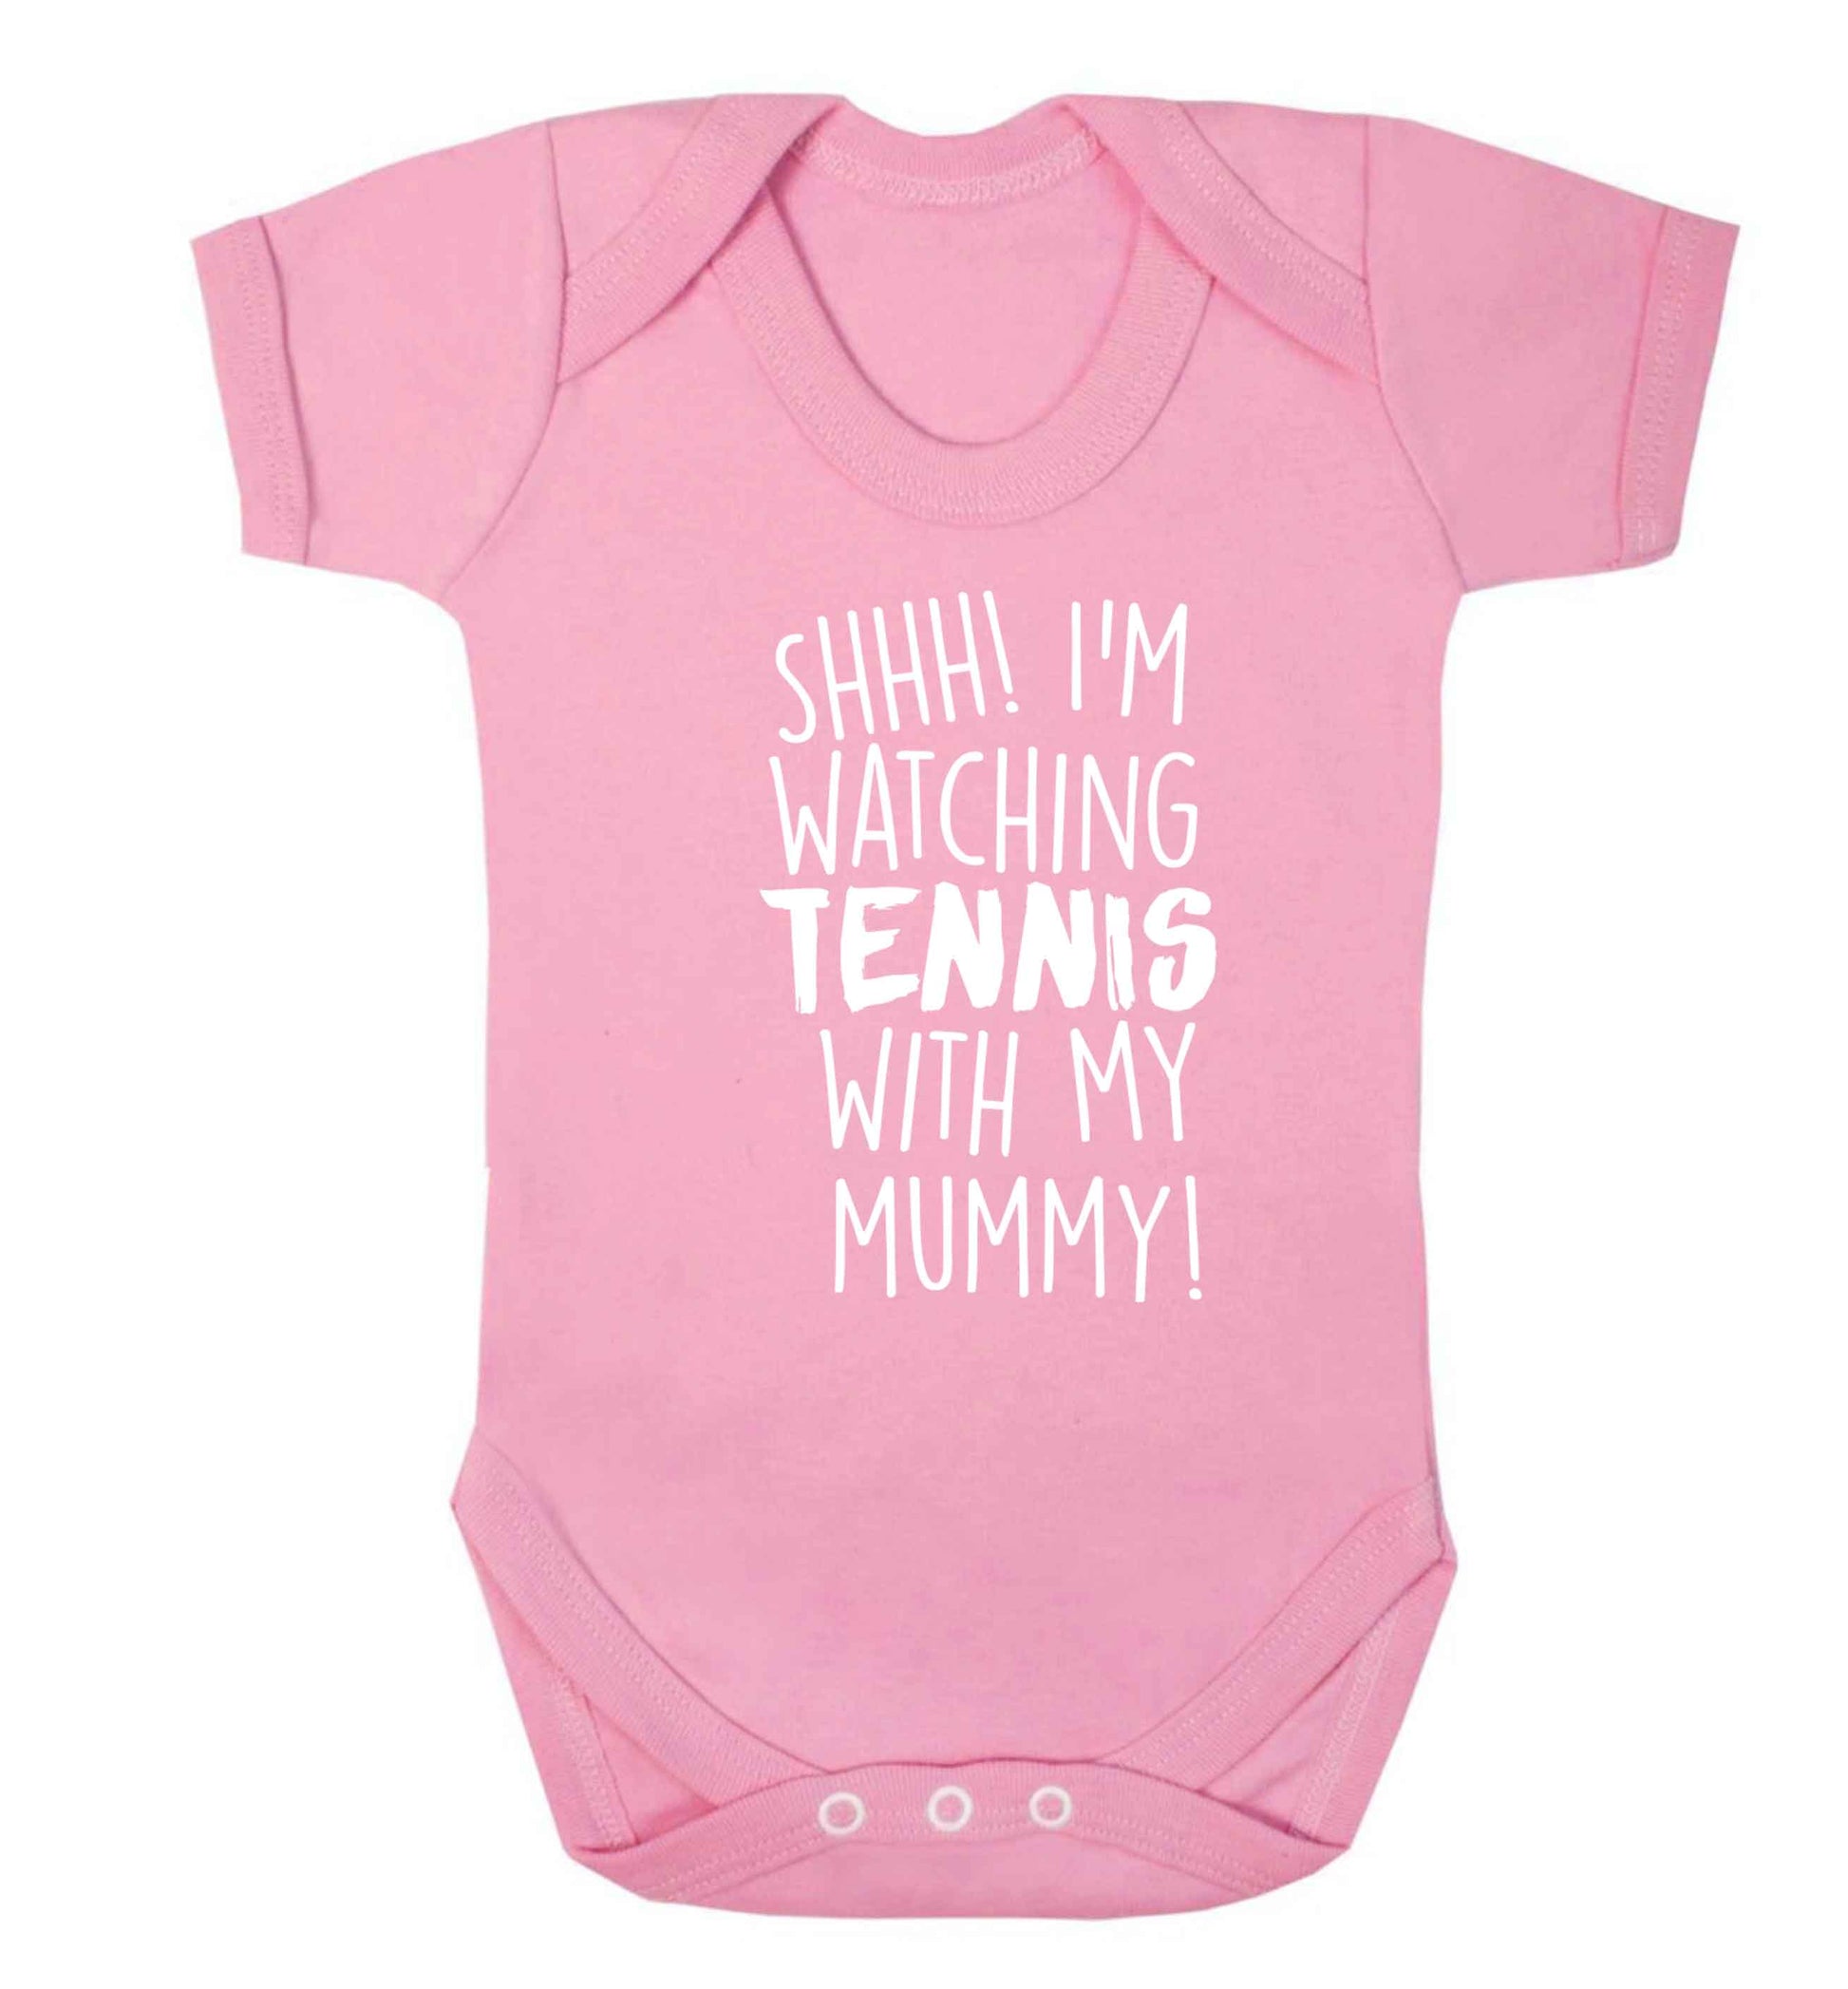 Shh! I'm watching tennis with my mummy! Baby Vest pale pink 18-24 months